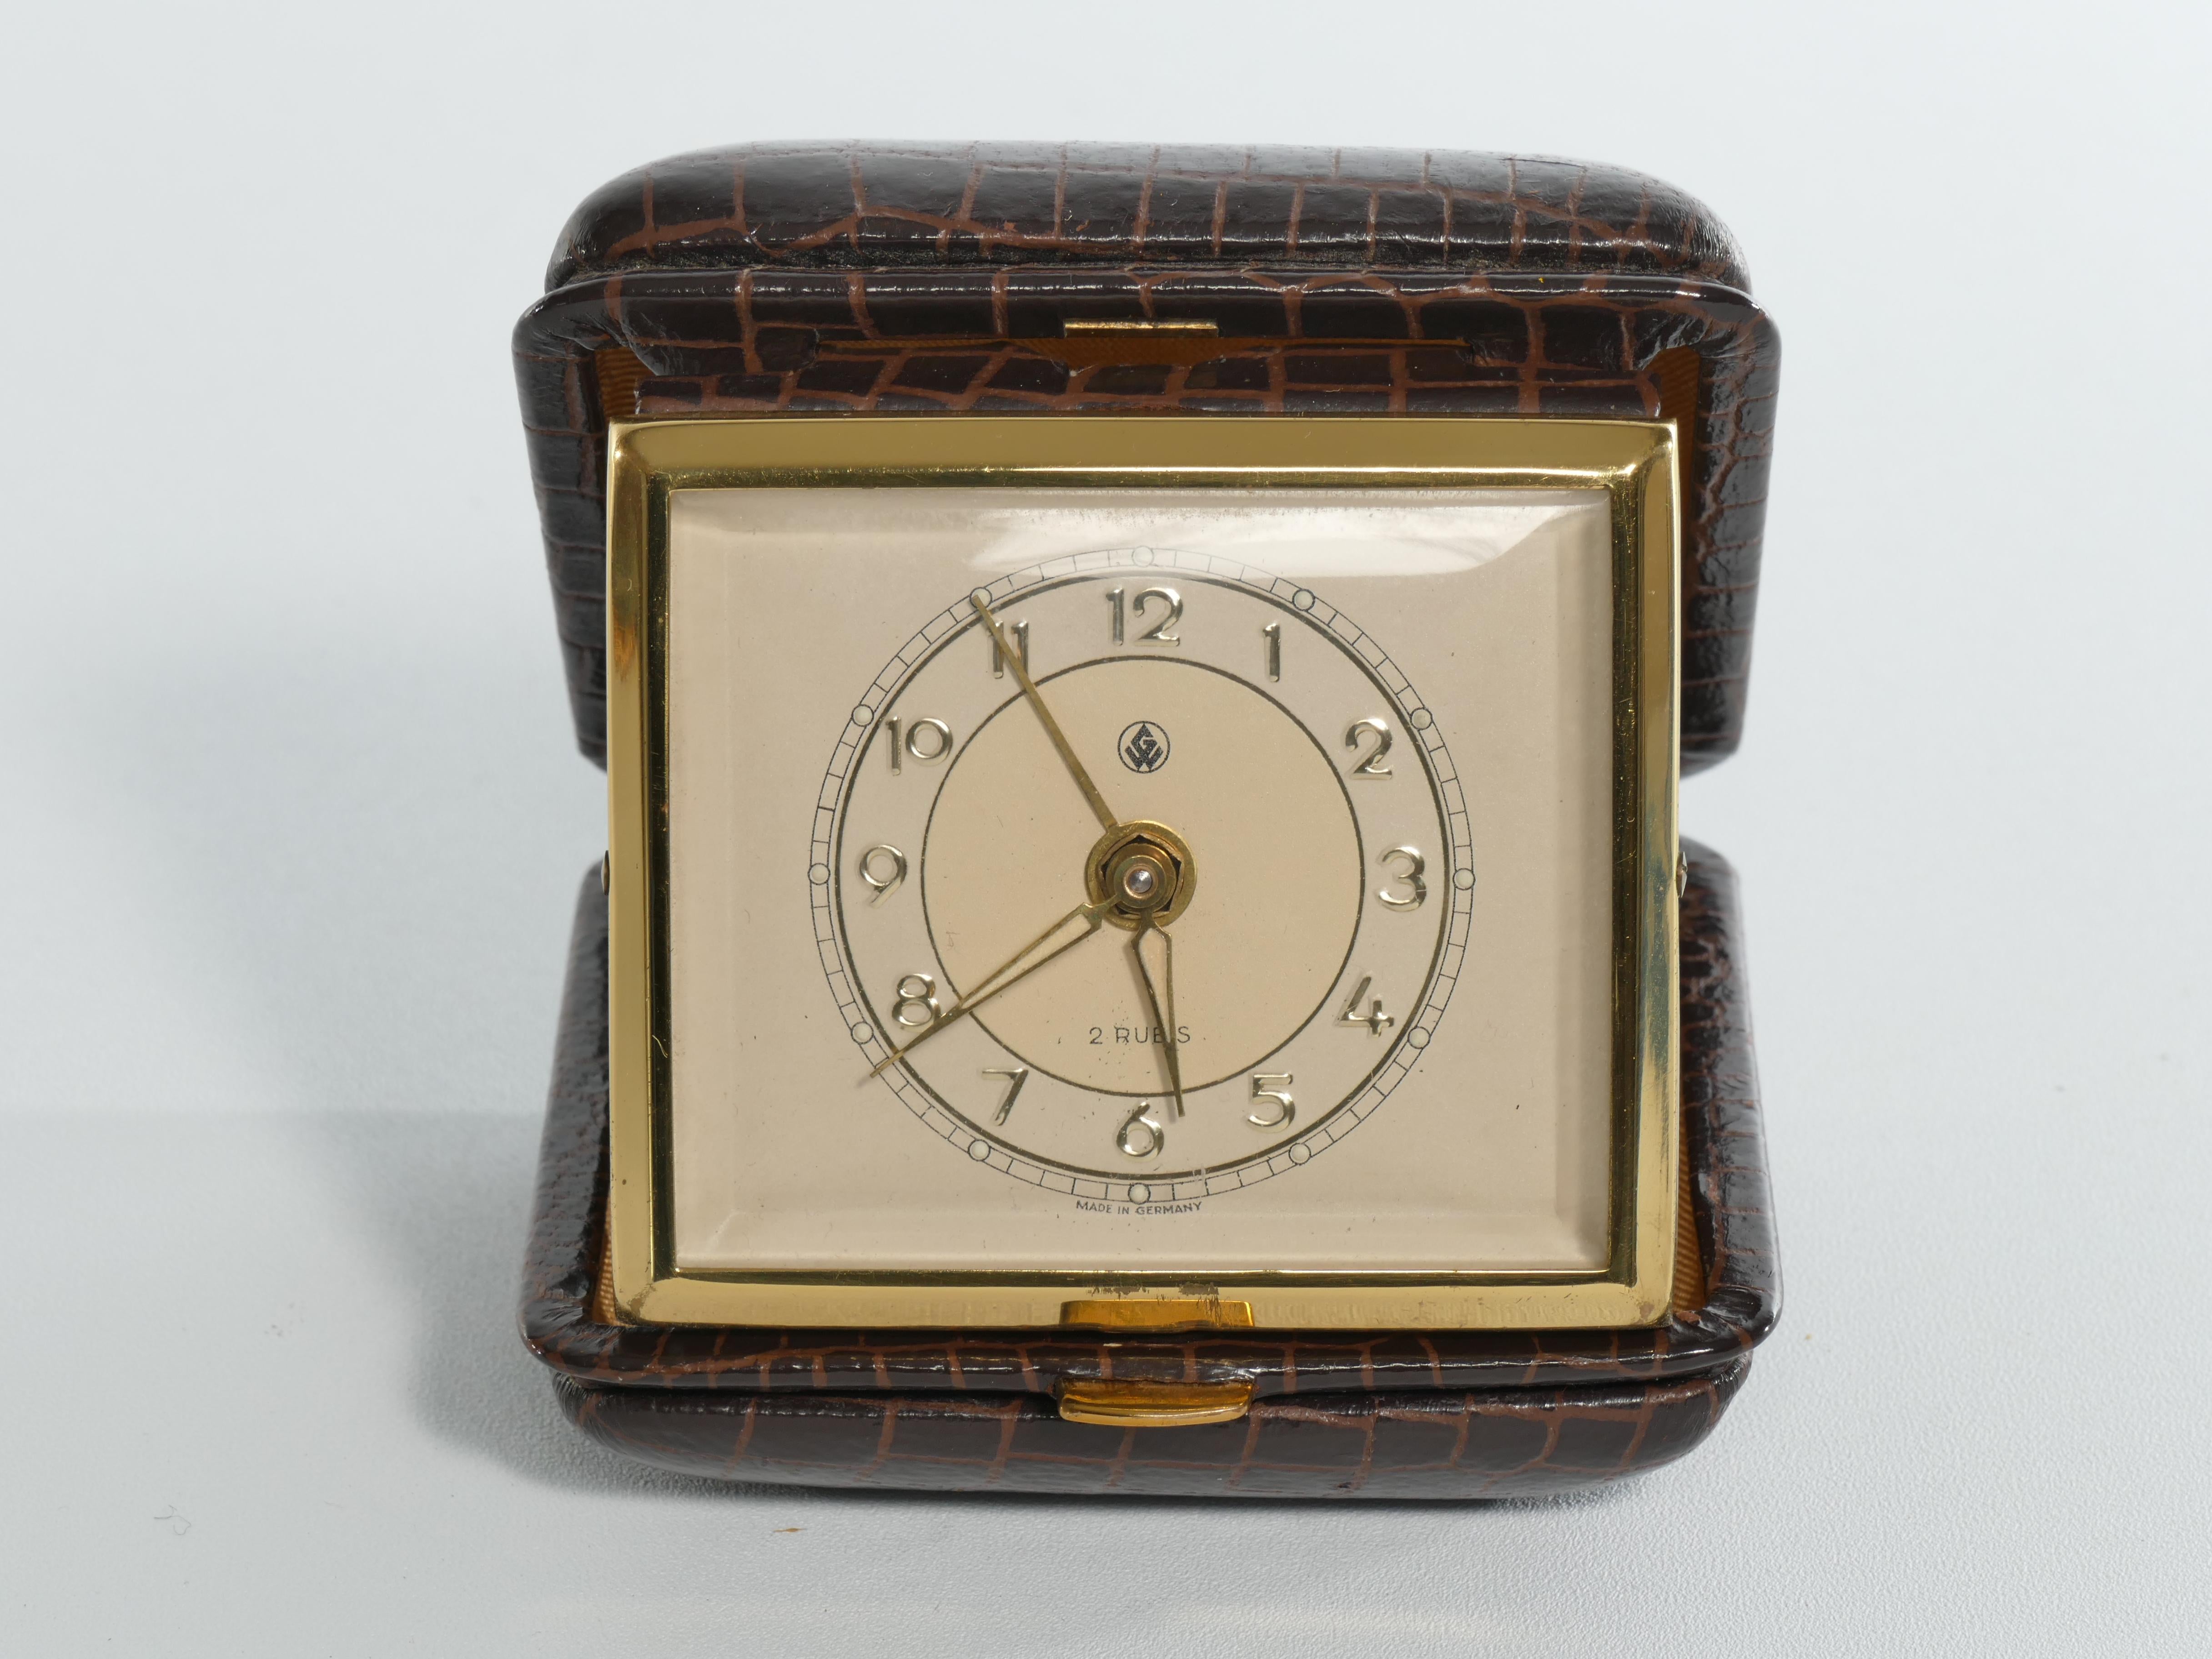 Hollywood Regency Travel Alarm Clock in Brass and Faux Snakeskin from 